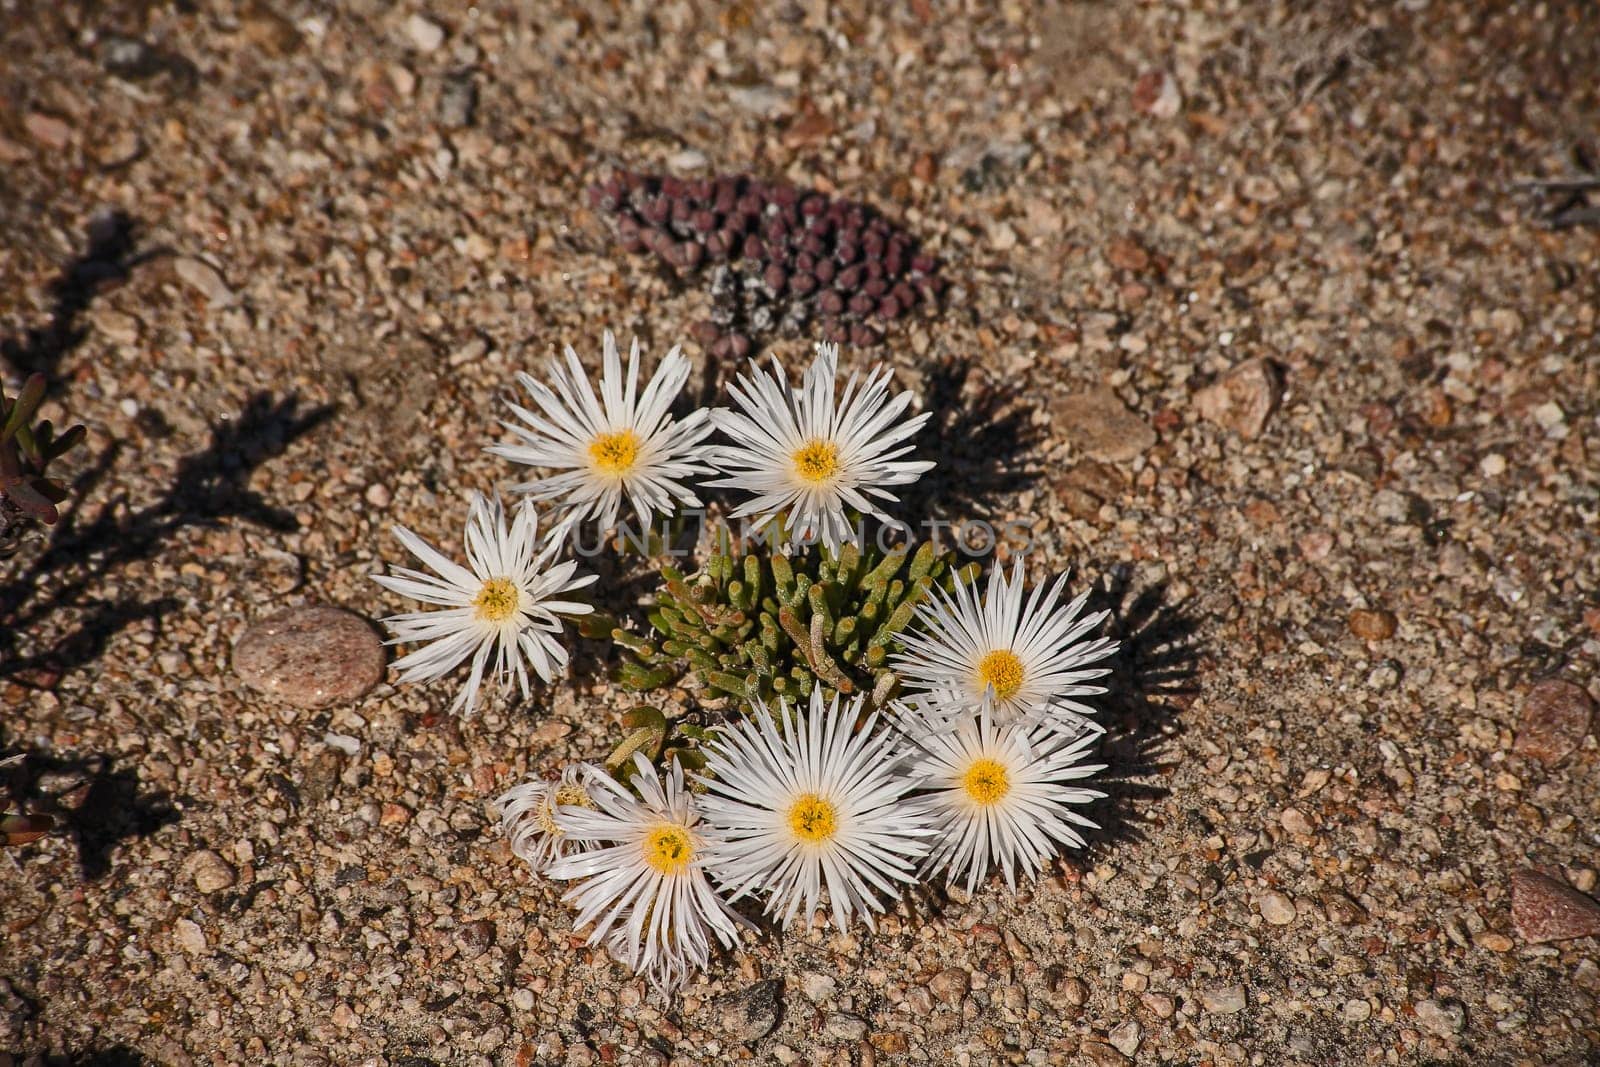 Namaqualand Spring flowers 11394 by kobus_peche